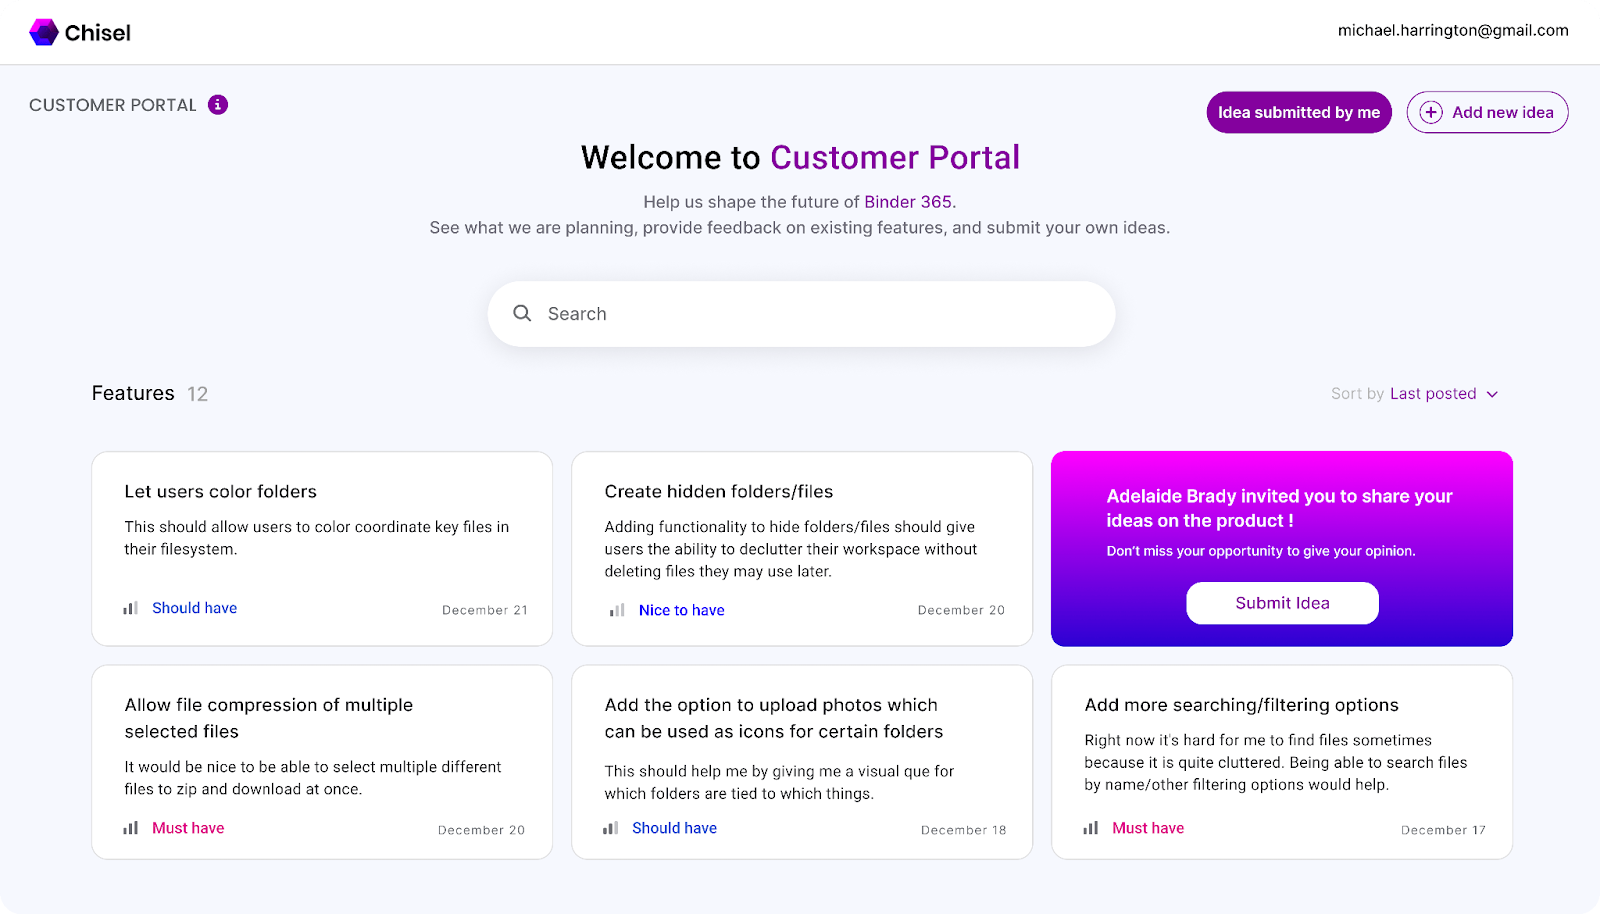 An image representing Chisel's Feedback Portal, showcasing a user-friendly interface with options to submit, store, and prioritize customer ideas. 